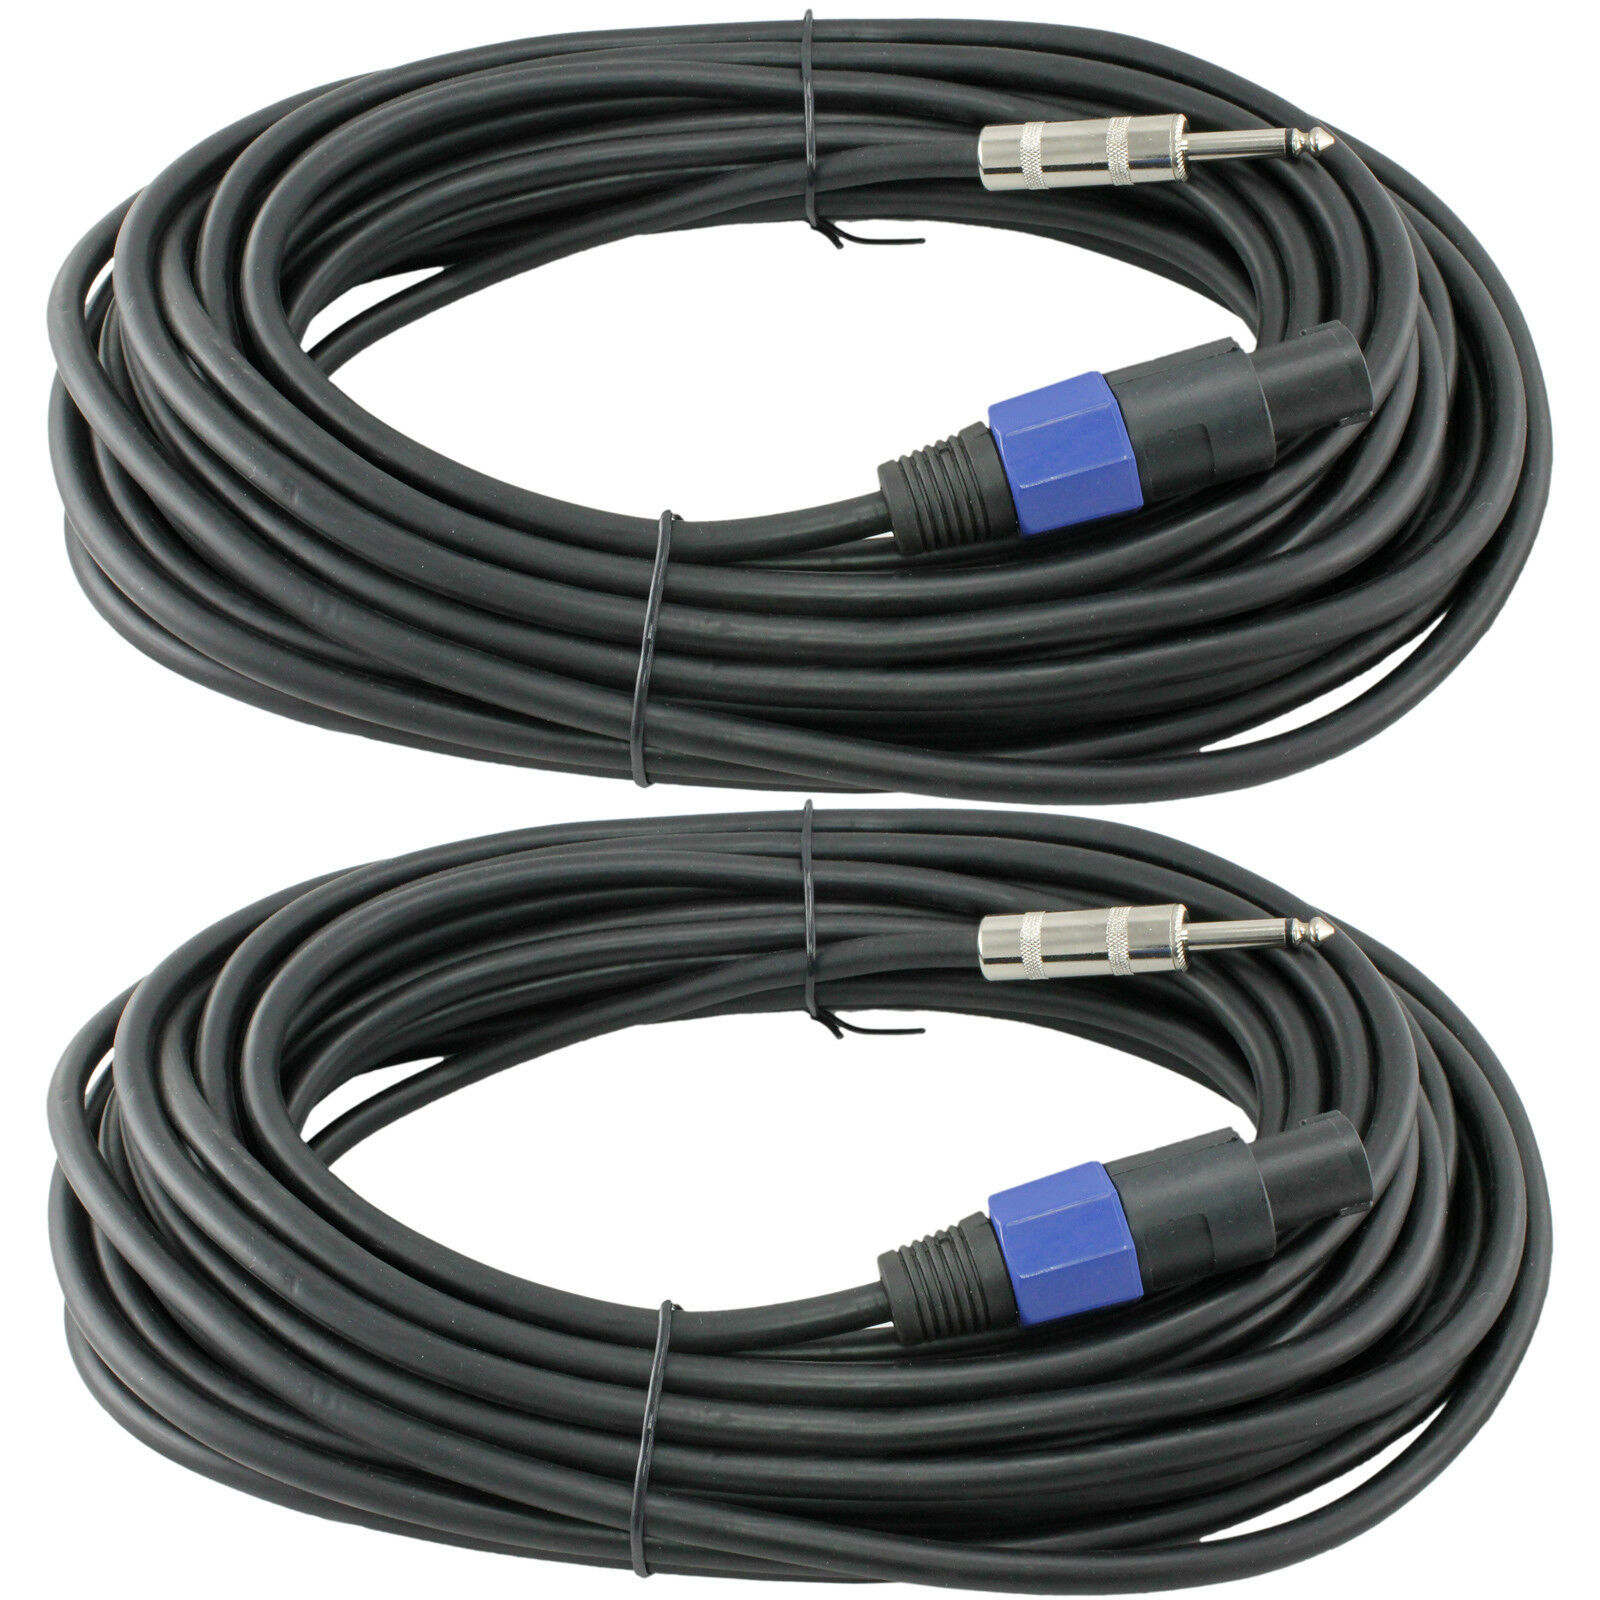 Primary image for Pair 2 Pack Lot Speakon To 1/4 Pa Speaker Cable Cord 14 Ga Gauge 50 Ft Foot Feet